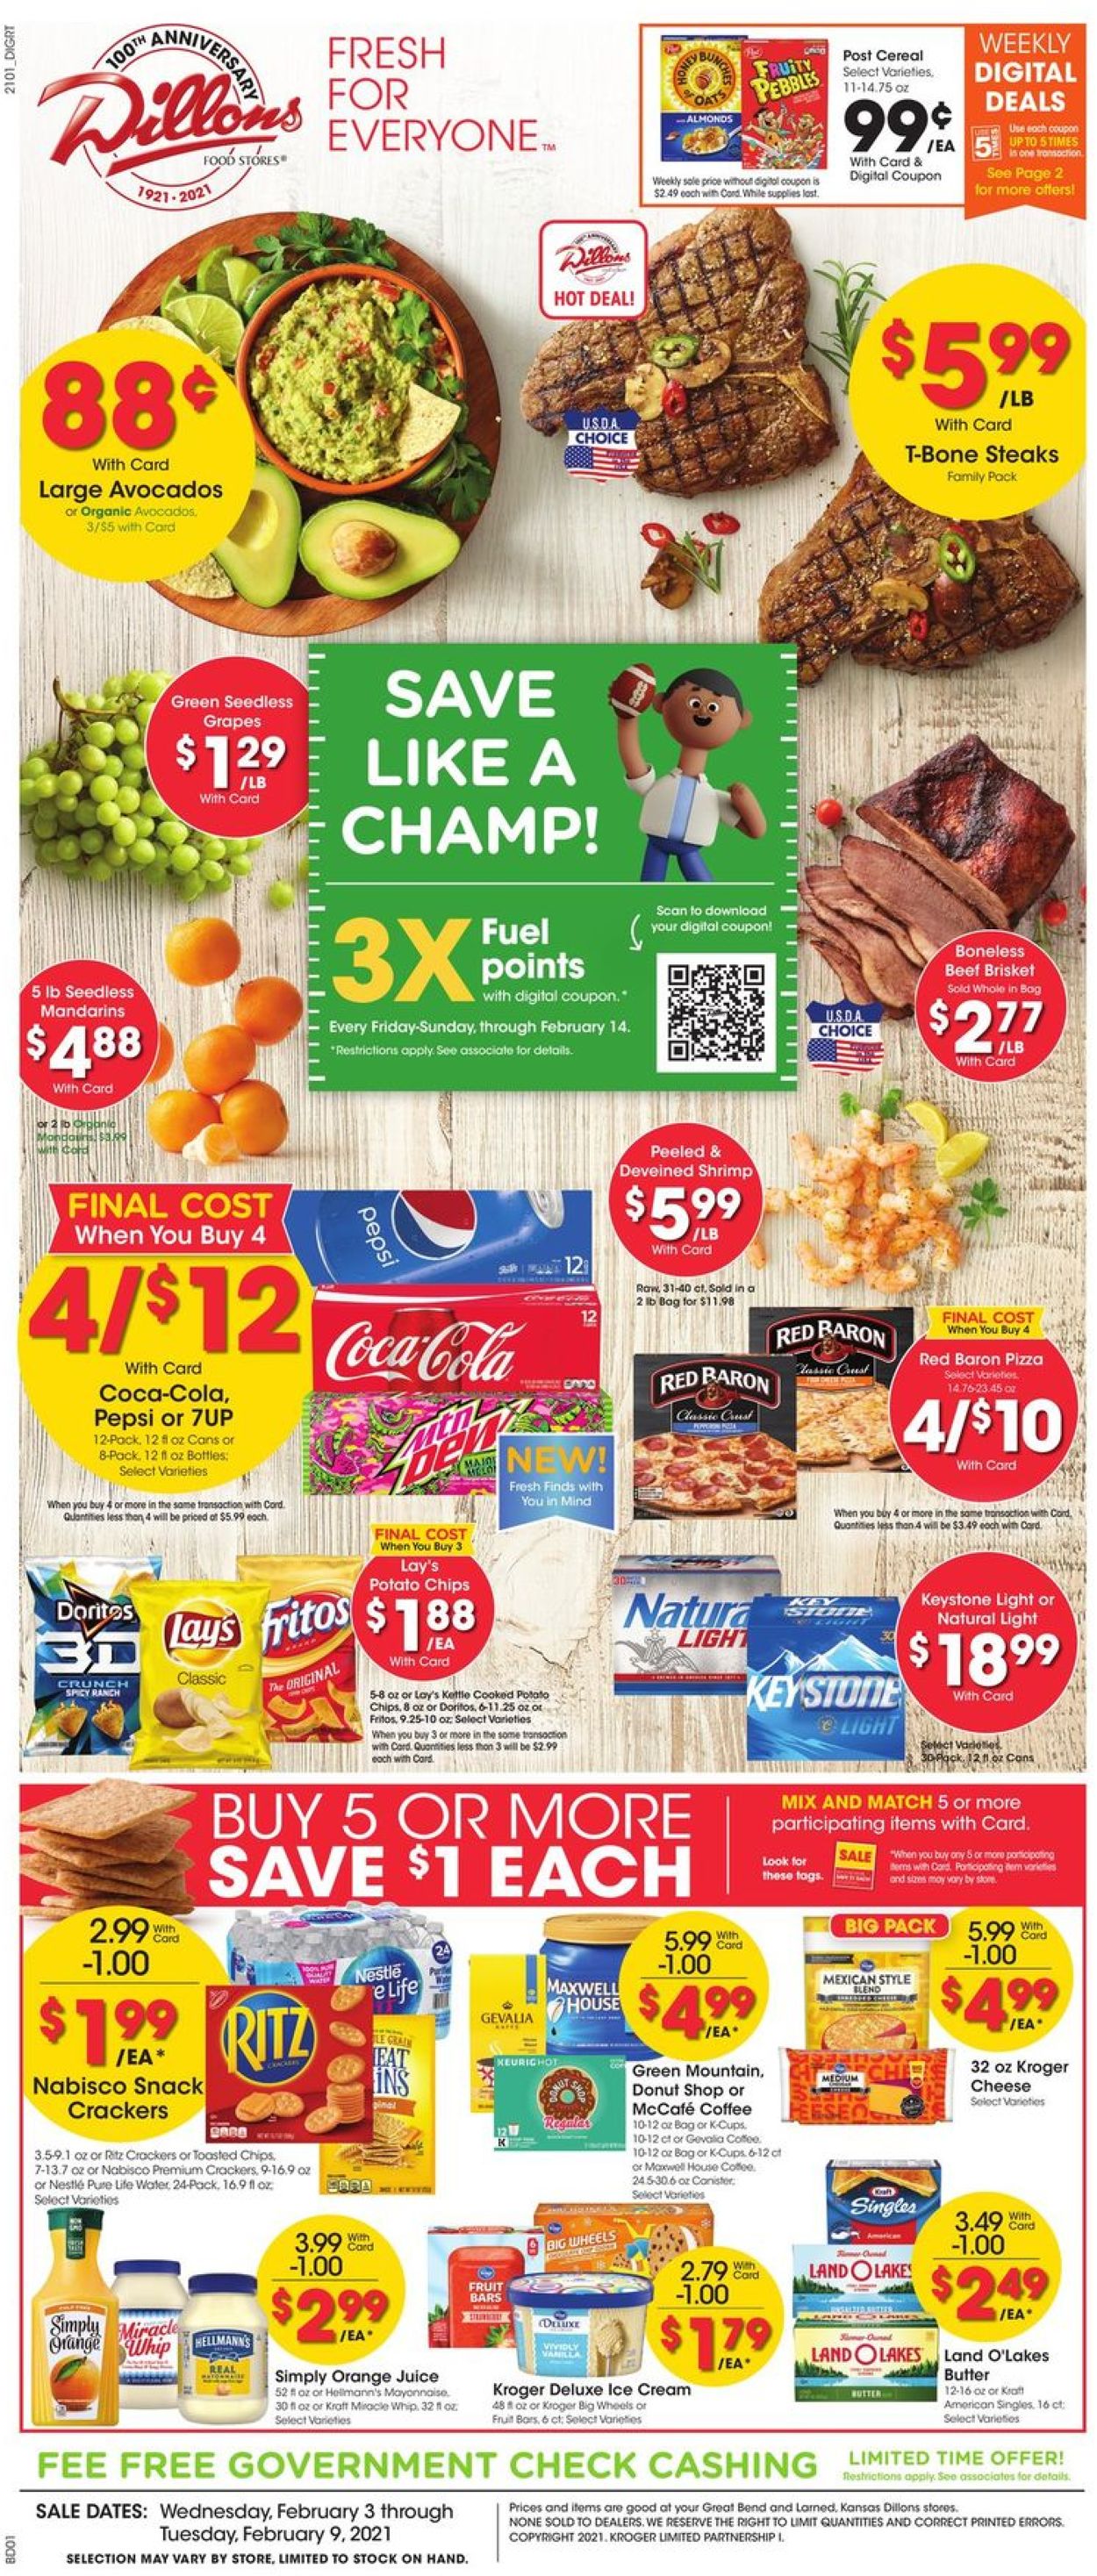 Dillons Current weekly ad 02/03 - 02/09/2021 - frequent-ads.com